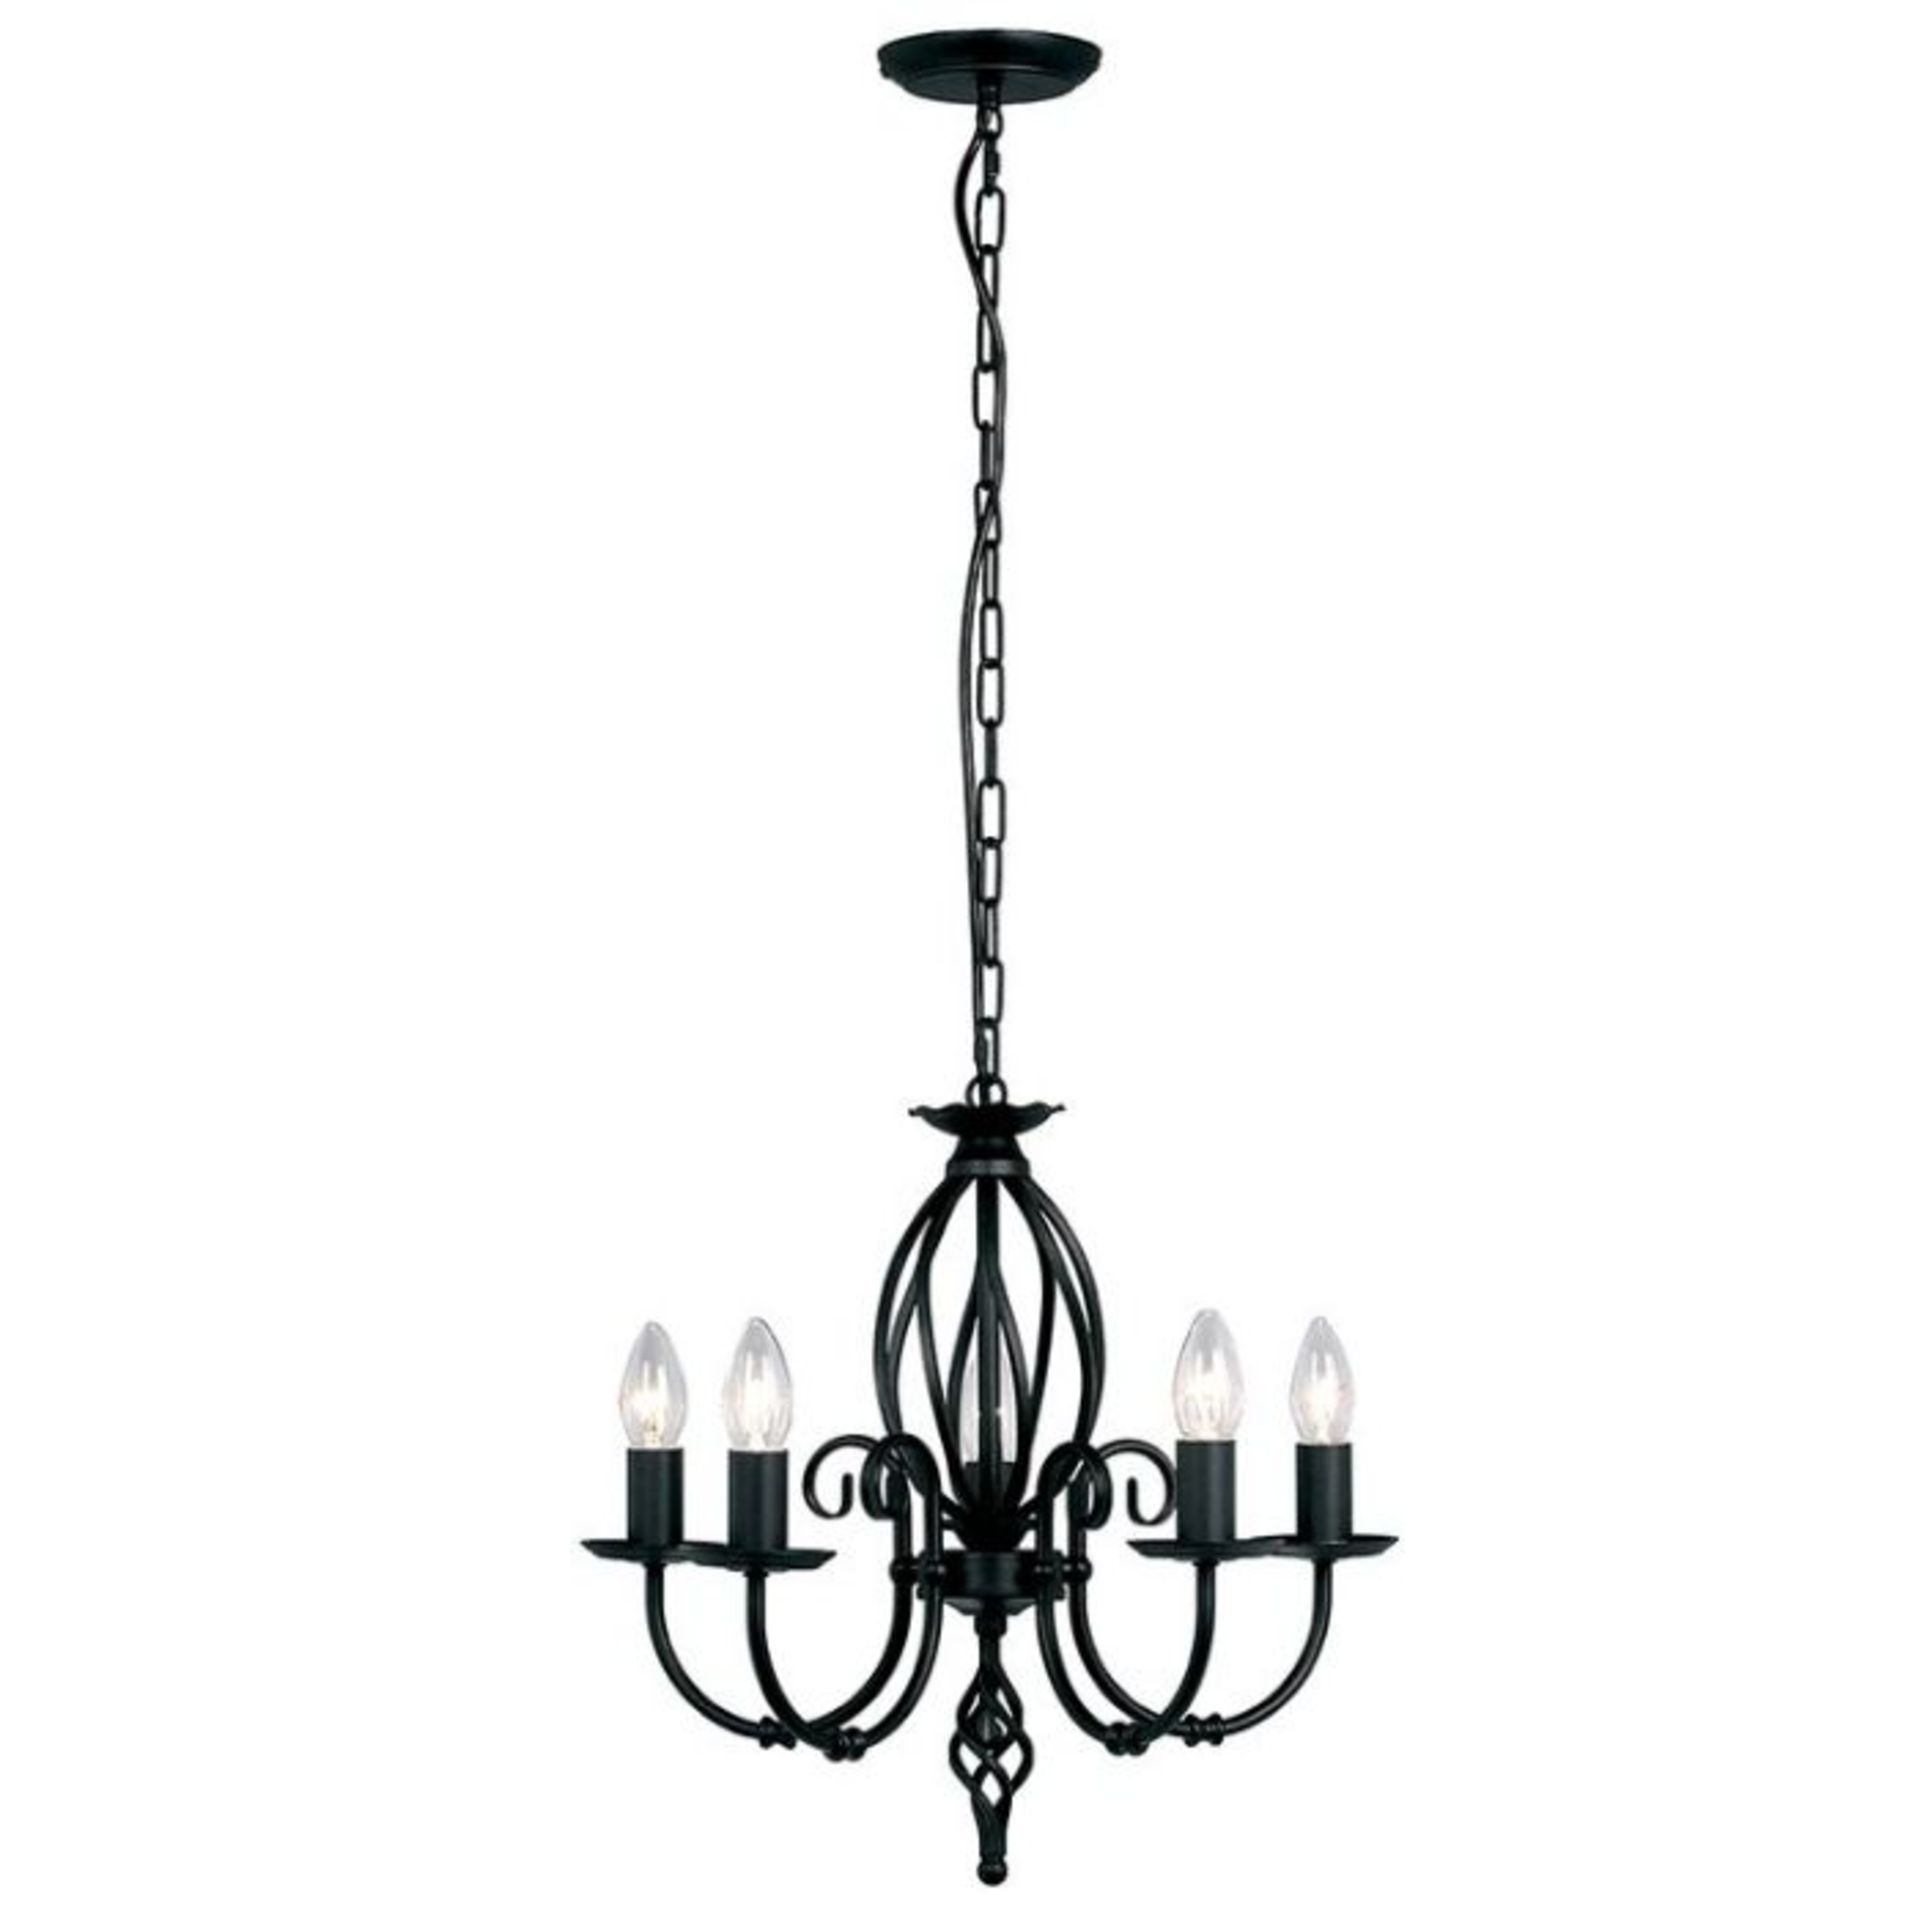 Marlow Home Co. Wannamaker 5-Light Candle-Style Chandelier (BLACK) - RRP £147.99 (ULL1019 - 12089/